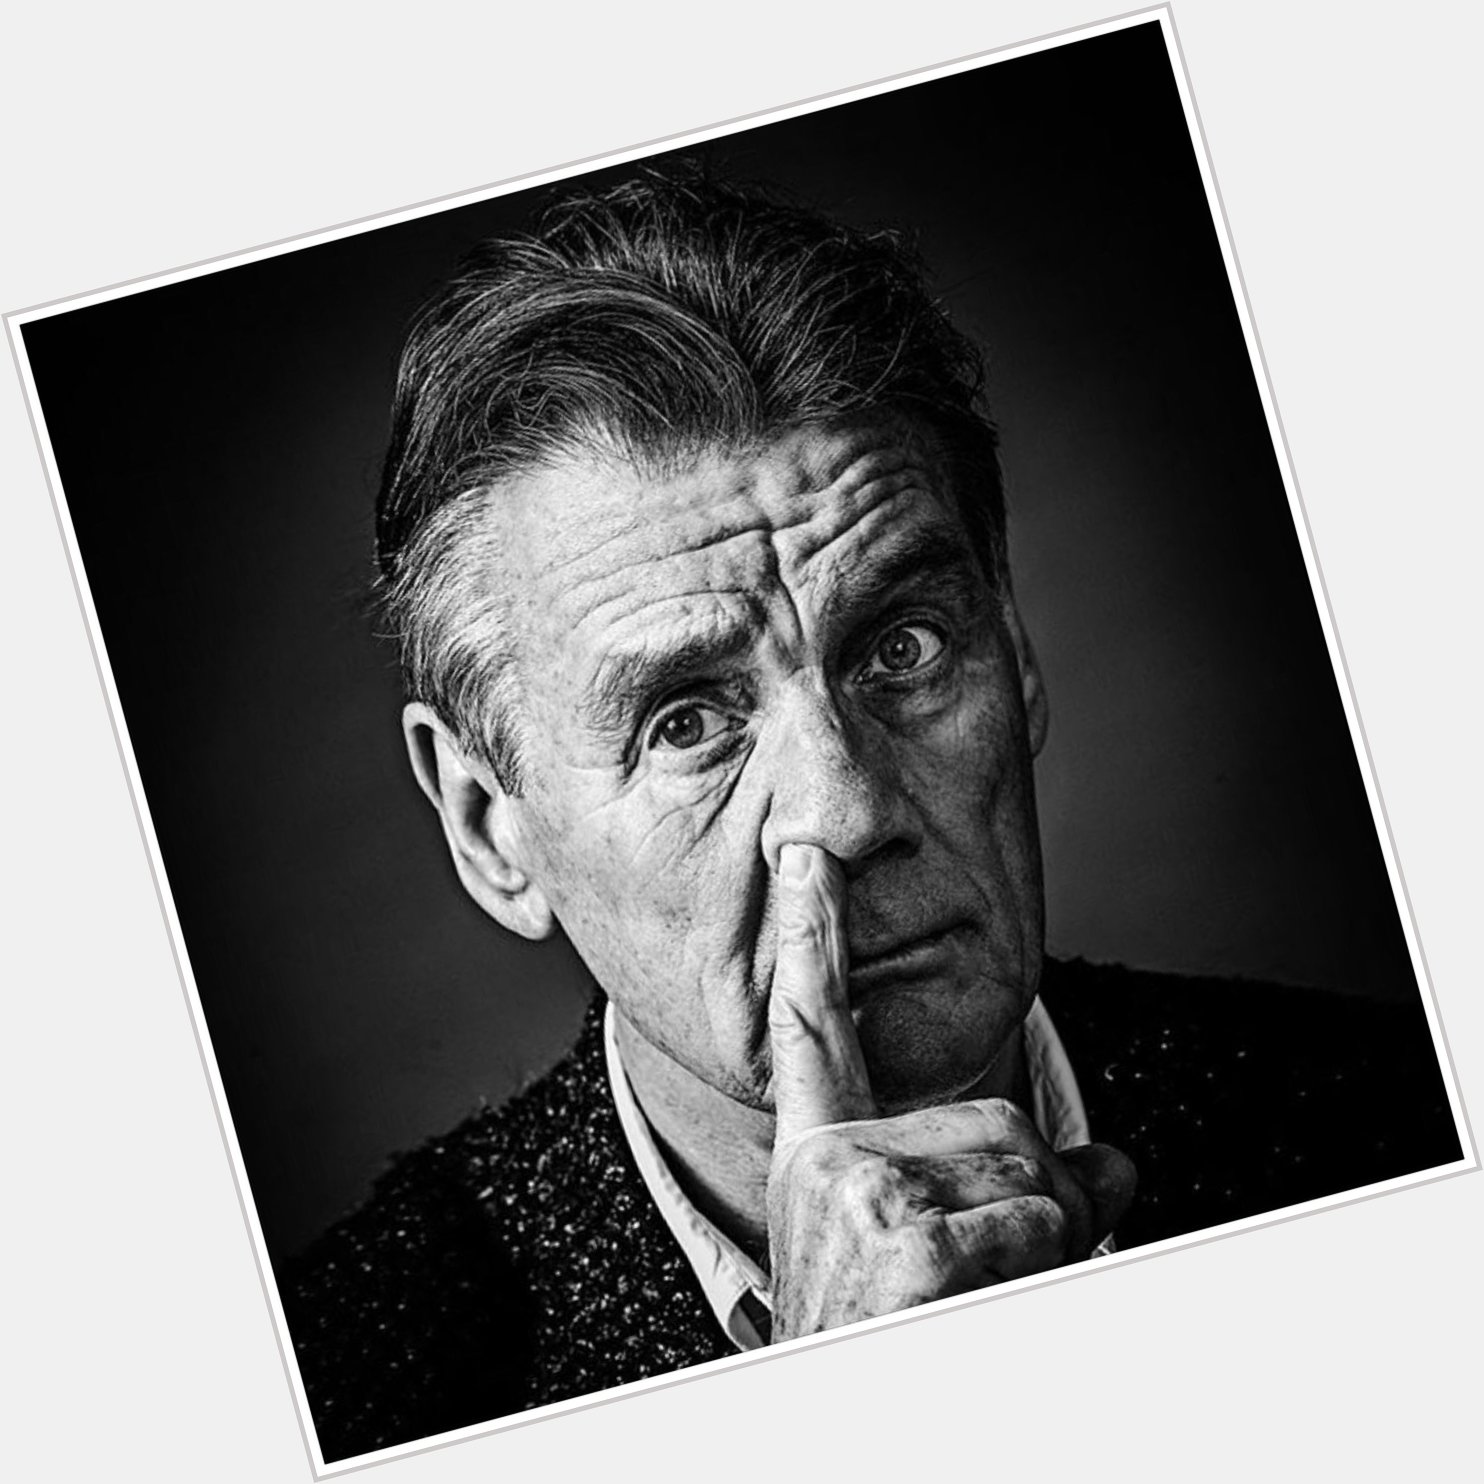 Happy Birthday to one of the greatest funny fellows we know. Cheers to your 75th Michael Palin!  